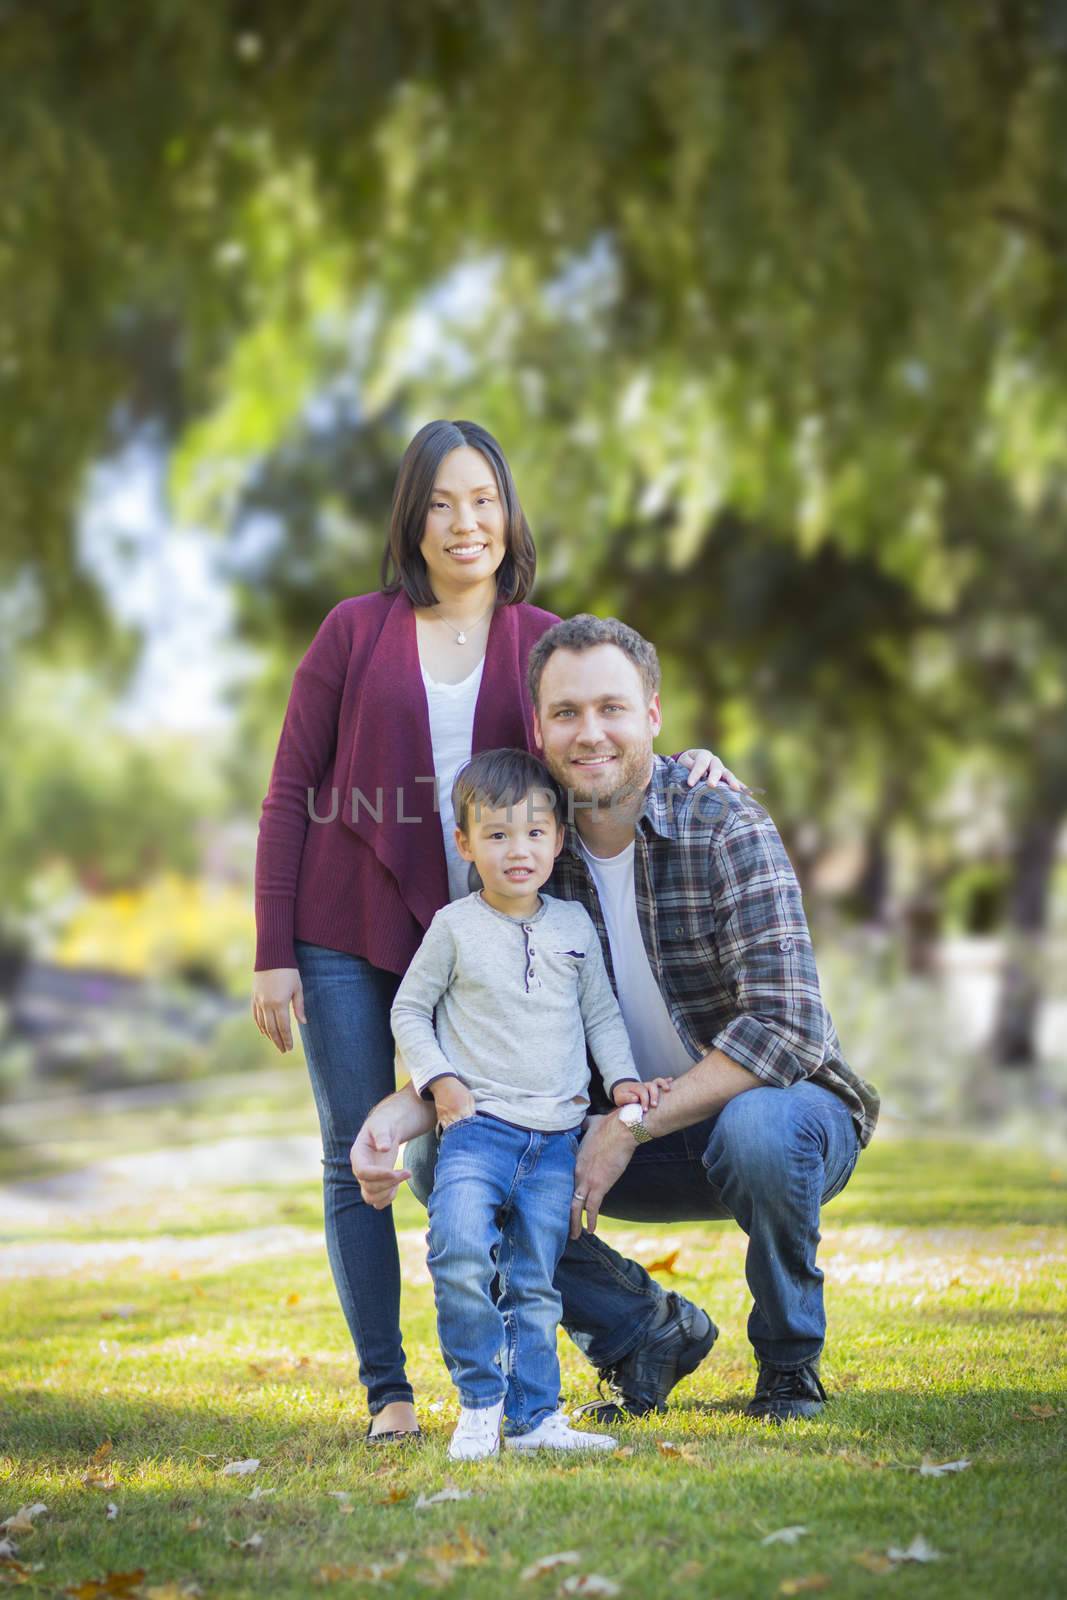 Happy Attractive Mixed Race Young Family Portrait Outdoors.